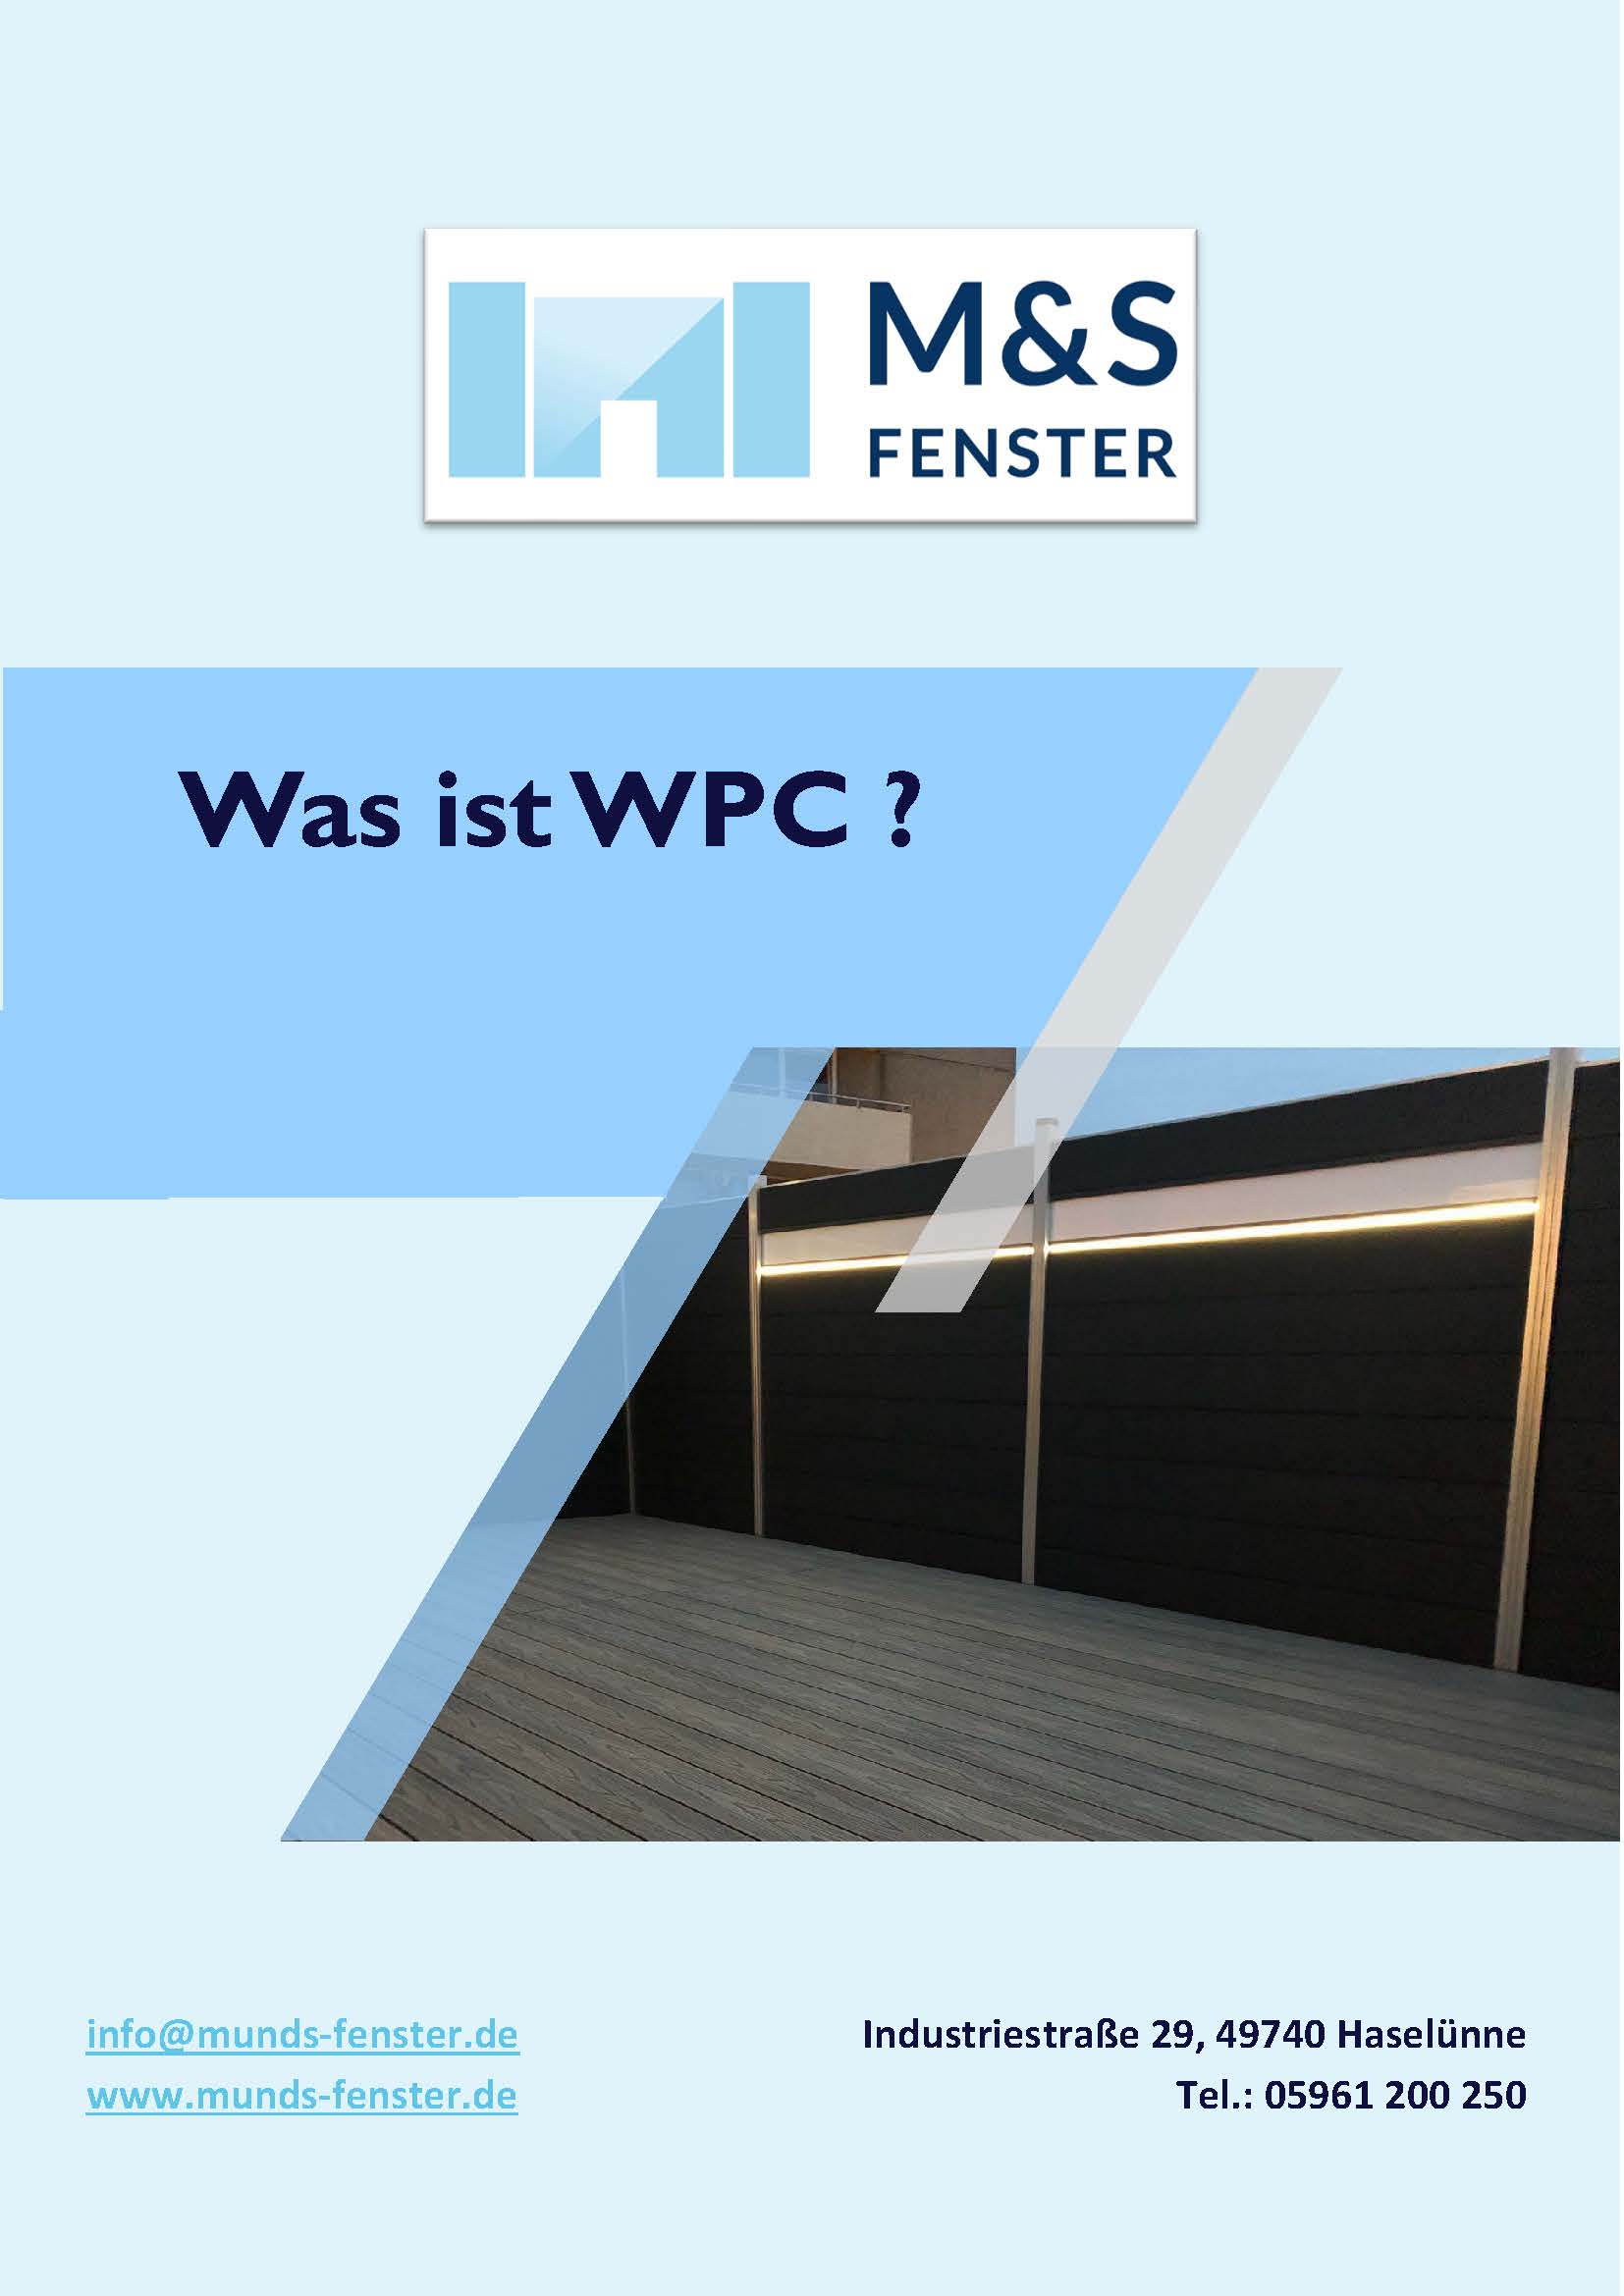 Was ist WPC?